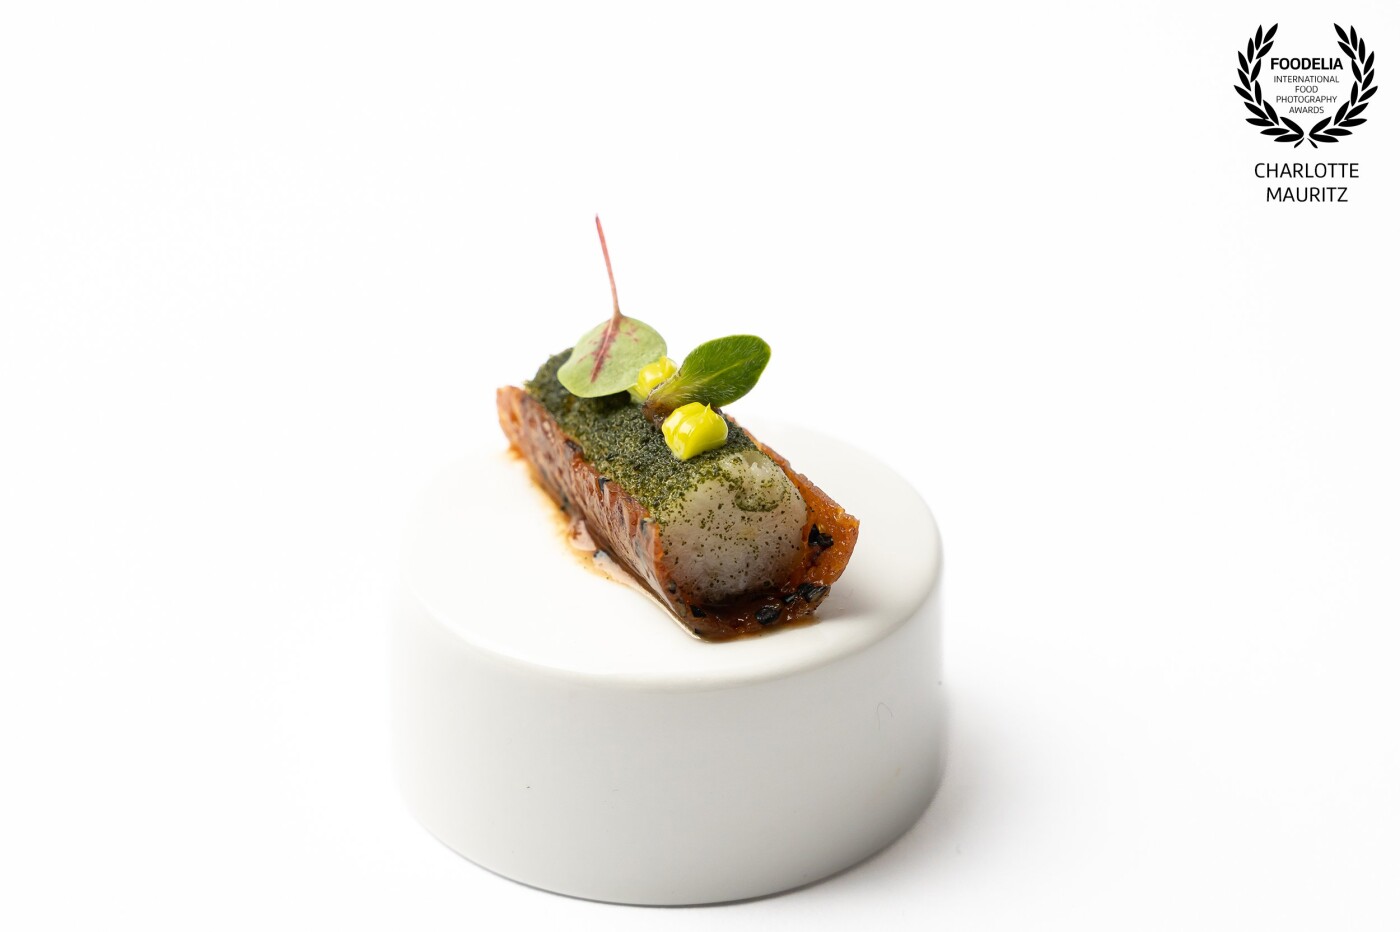 This is one of the festive appetizer made by the Culinary Team The Netherlands for The Culinary Worldcup 2022. This appetizer is part of the chefs table menu and is made with Dutch Kingfish.